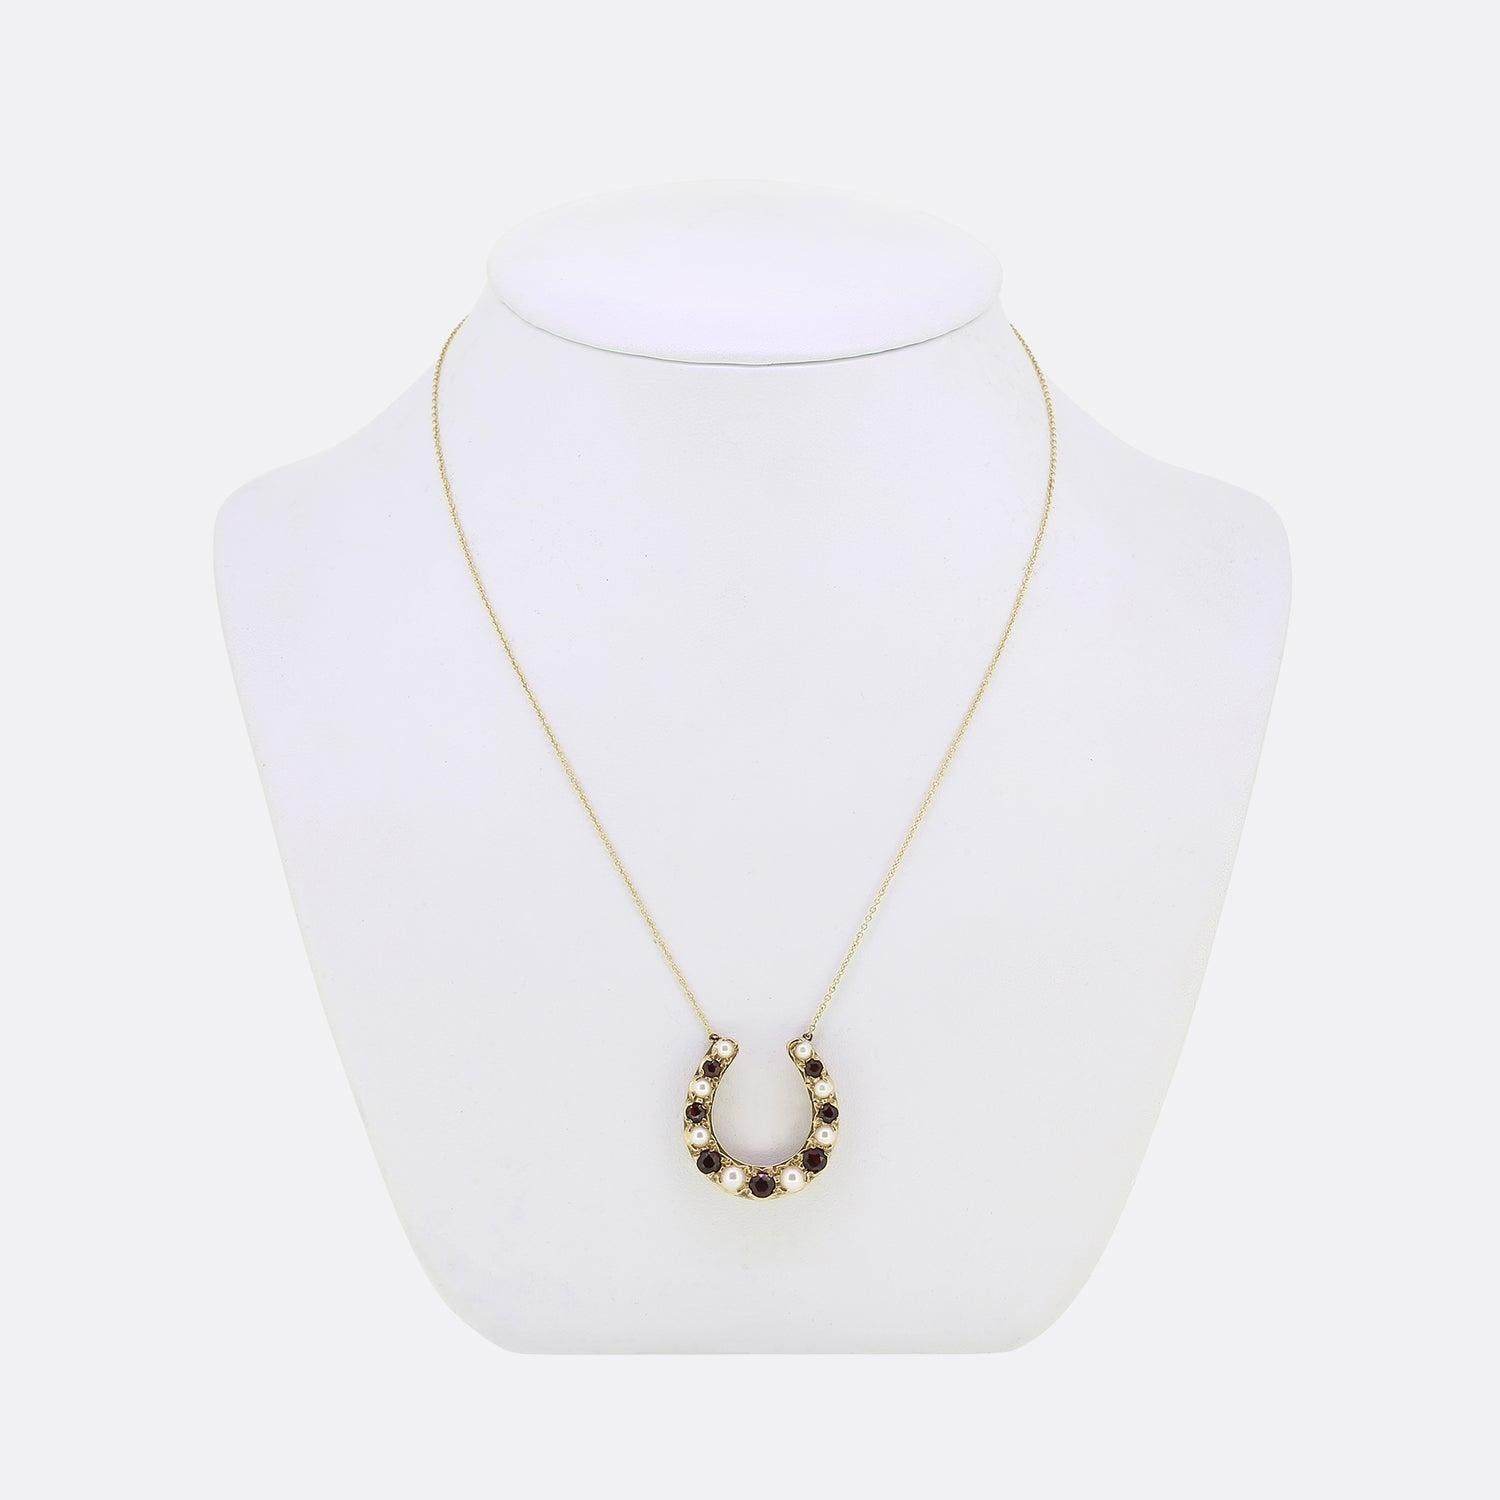 This is a lovely vintage lucky horseshoe necklace. The necklace features an alternating pattern of pearls and garnets in a 9ct yellow gold horseshoe motif. It started life as a Vintage brooch but has been transformed into a wonderful necklace by